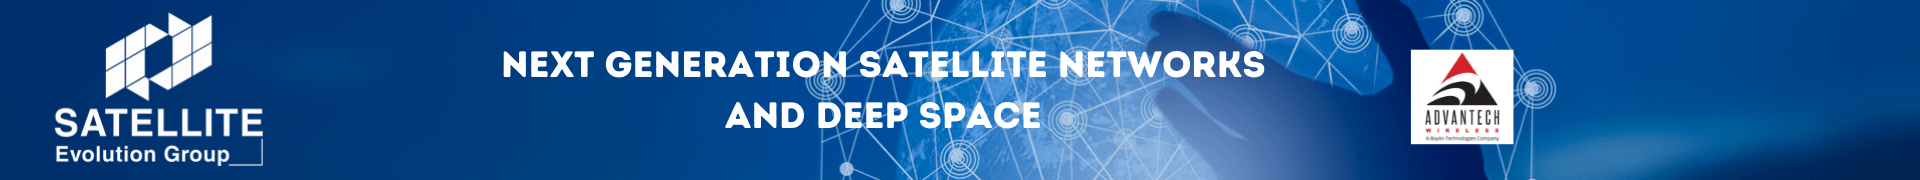 Next Generation Satellite Networks and Deep Space